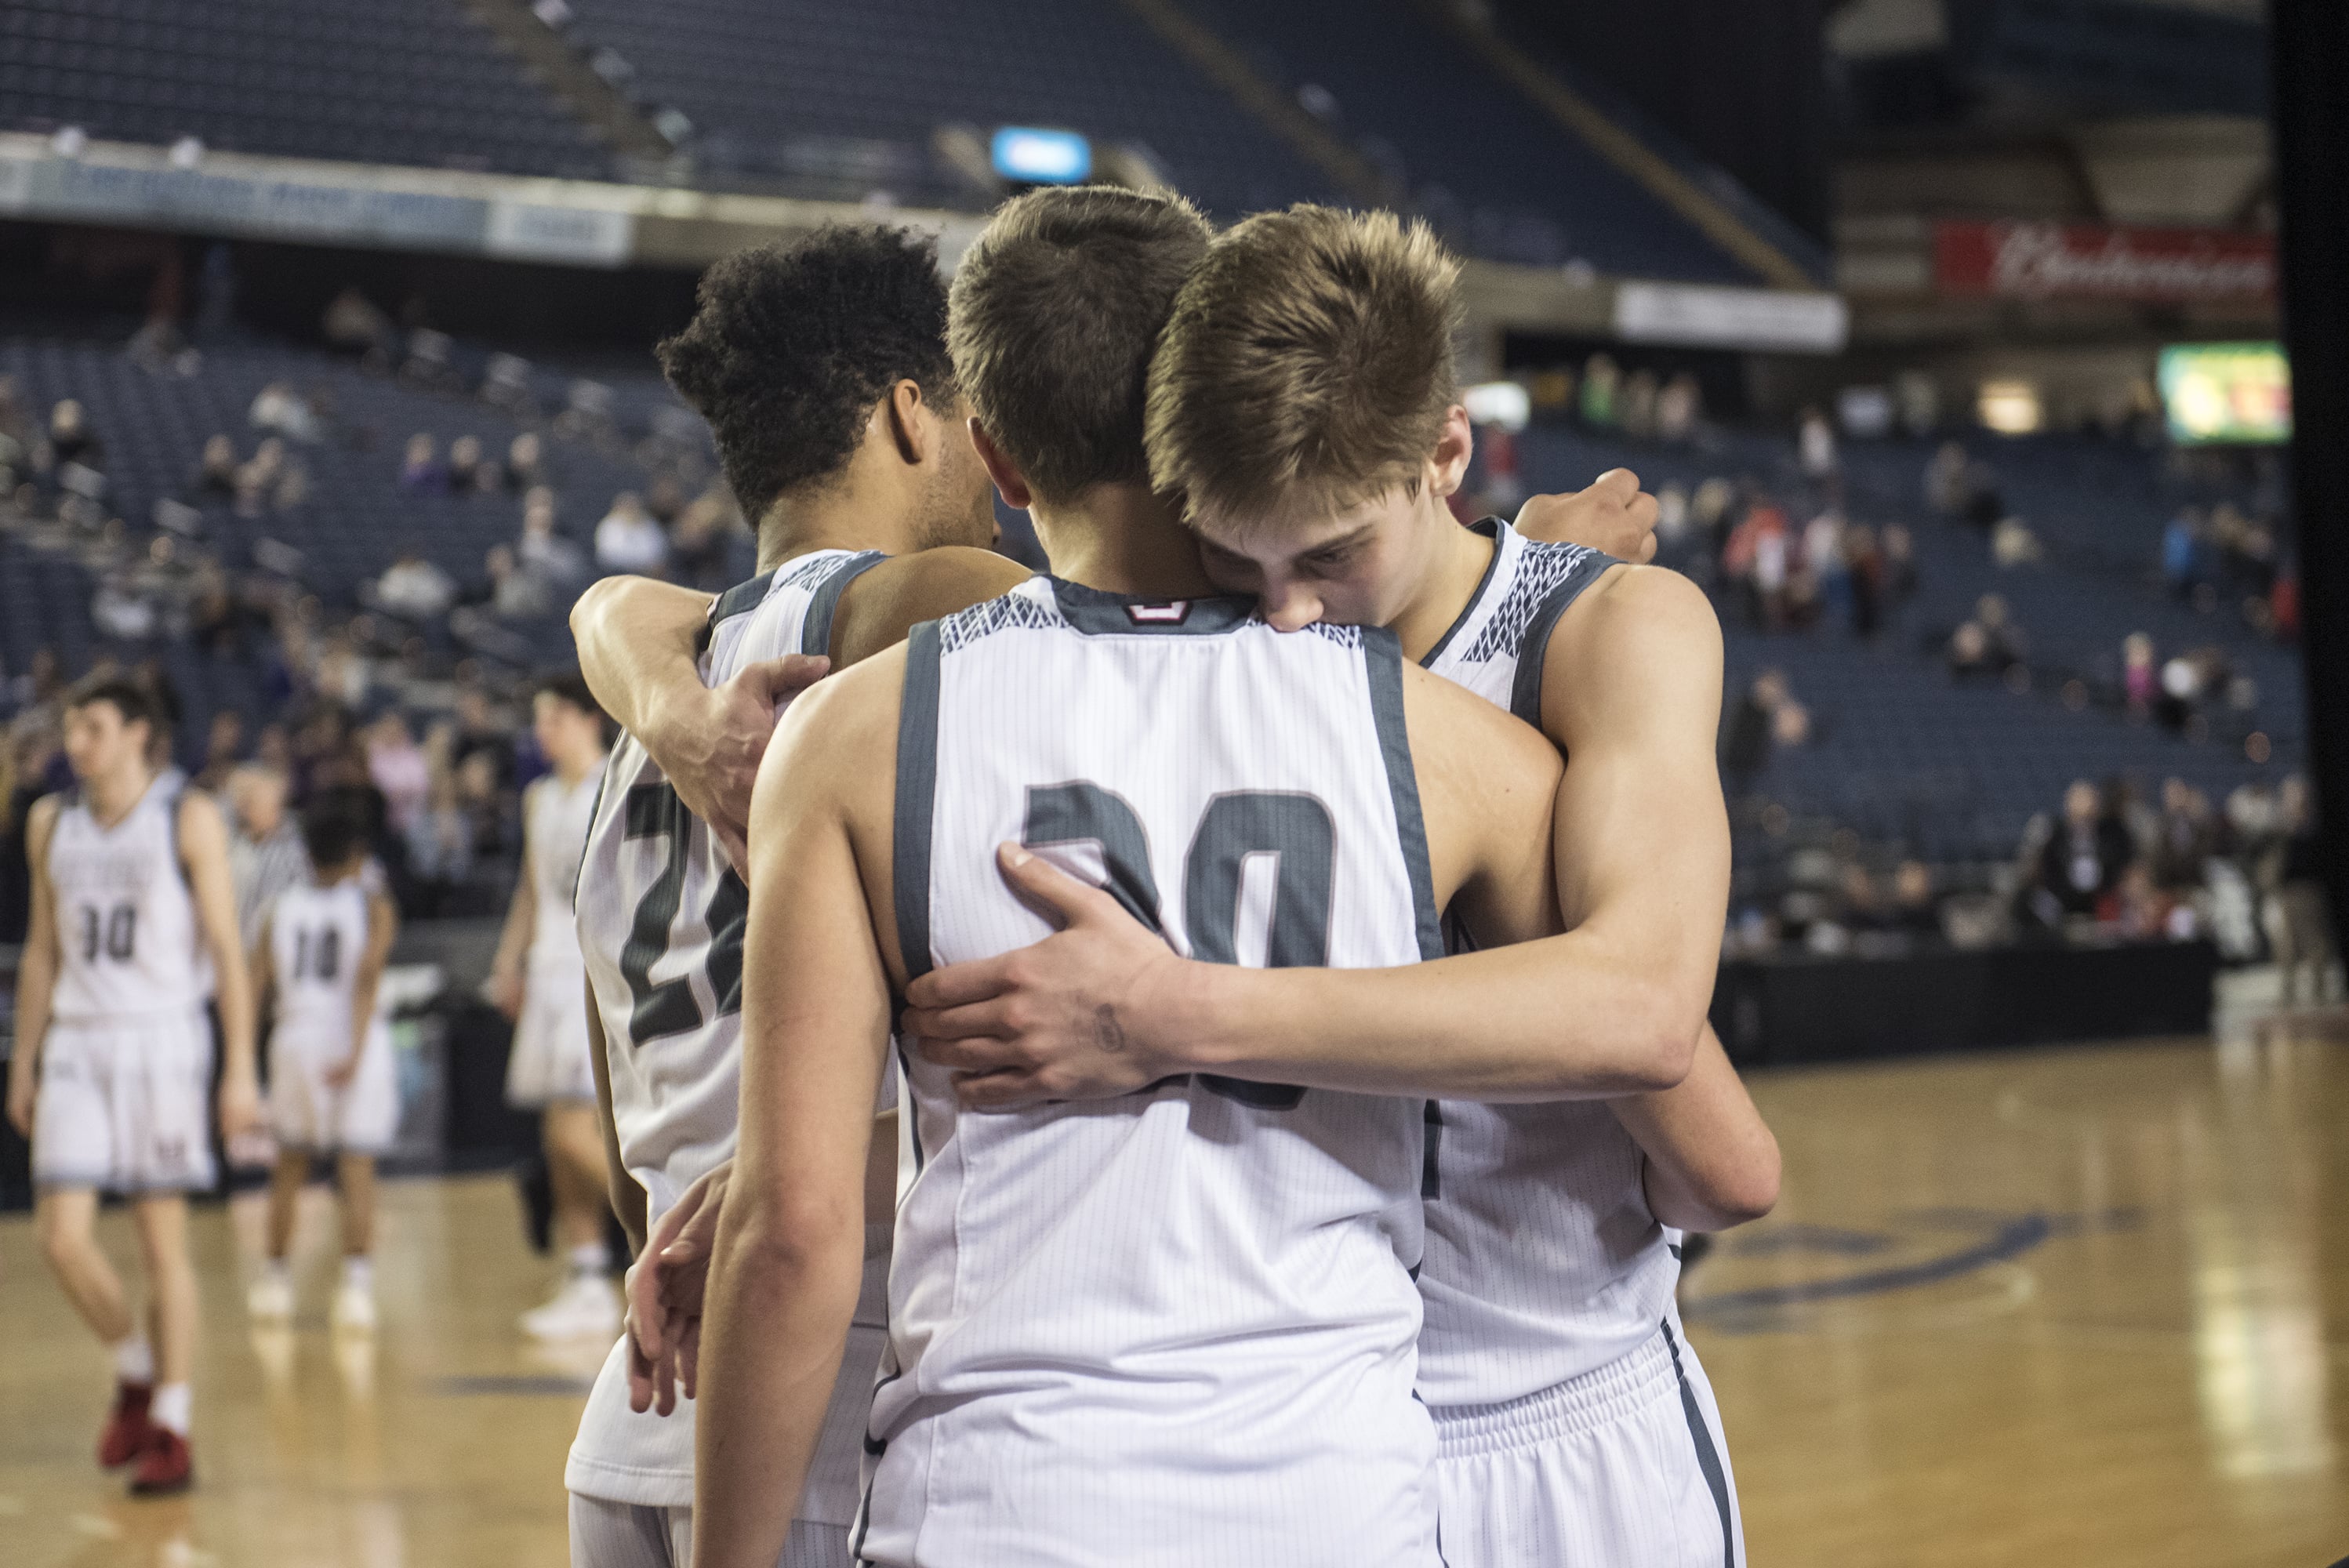 Union reacts to the end of their season following a loss to Puyallup during the 4A Hardwood Classic at the Tacoma Dome on Friday March 1, 2019.